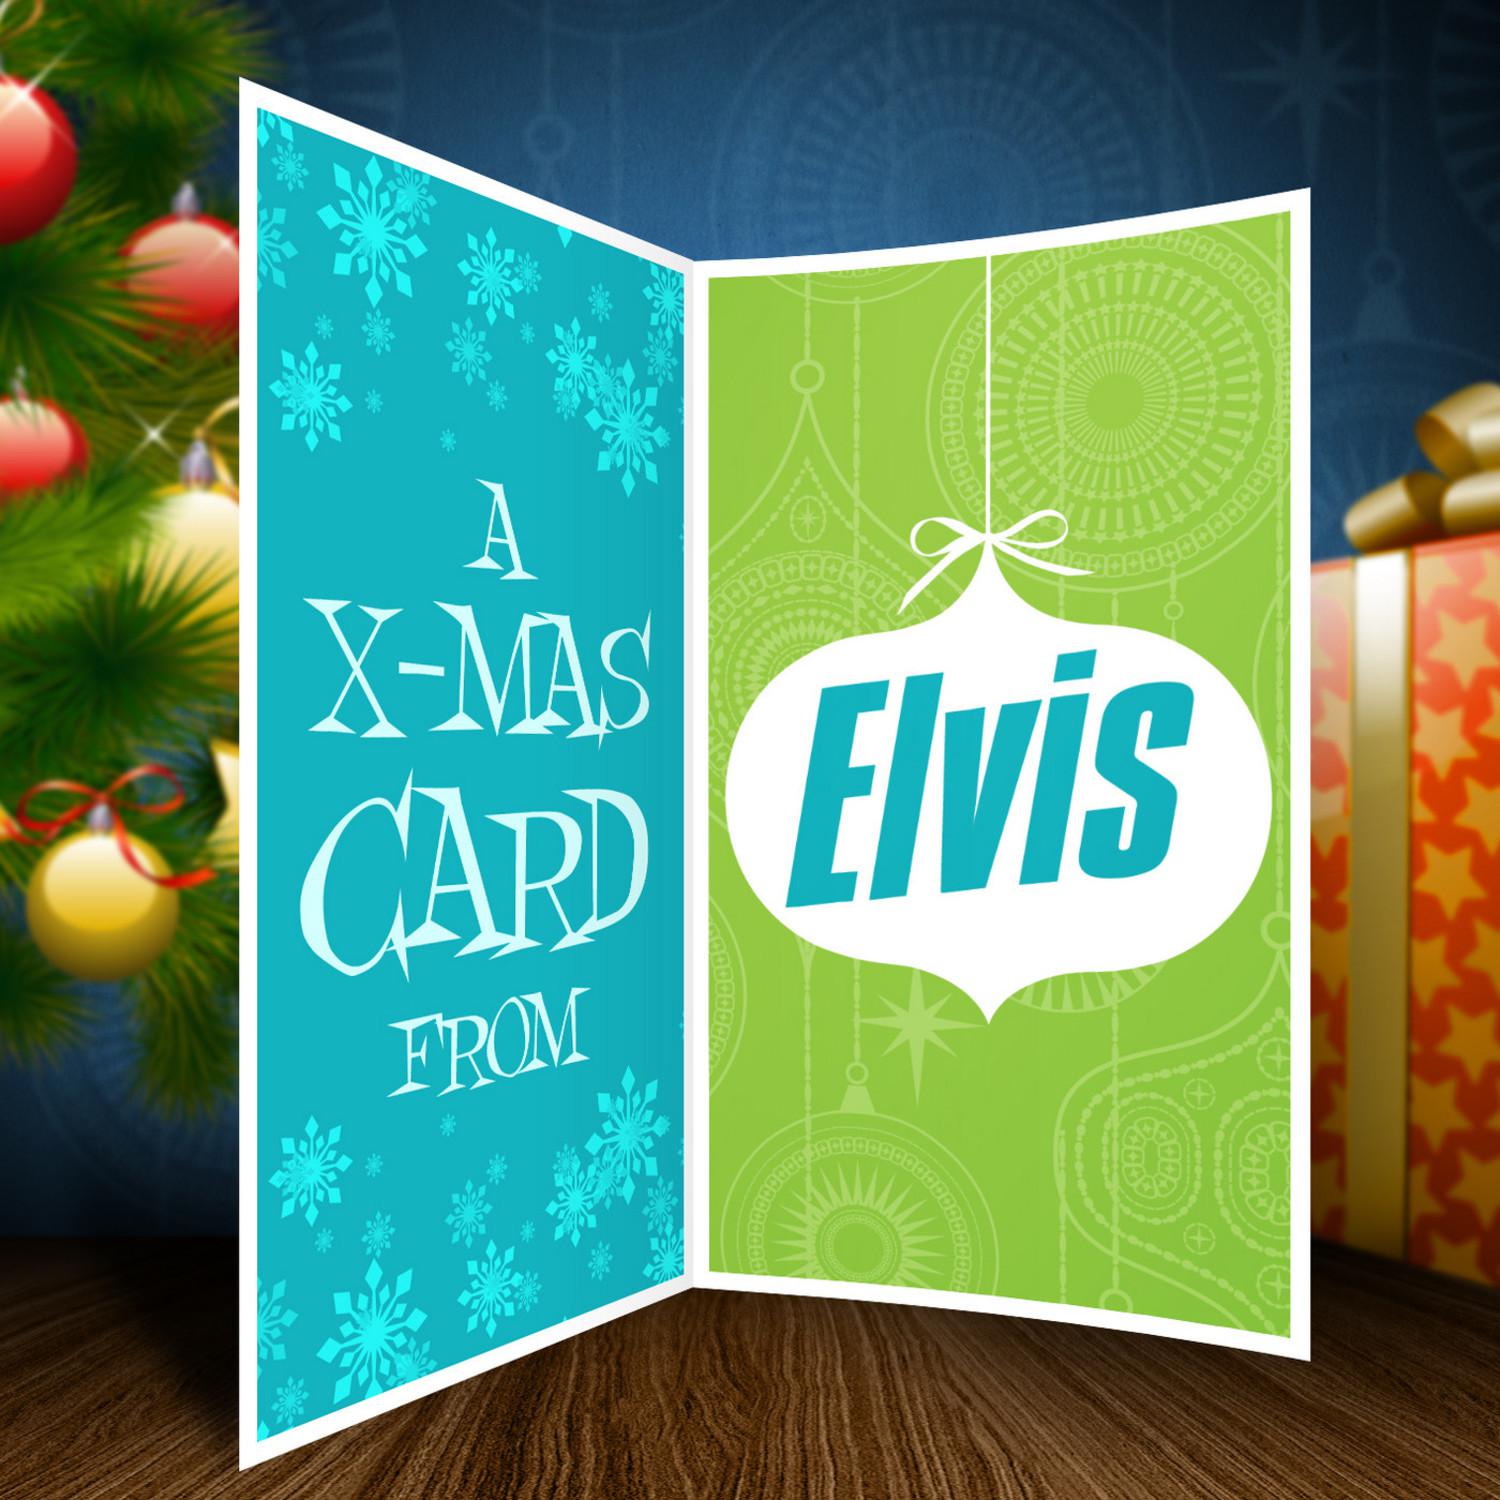 A Christmas Card From Elvis